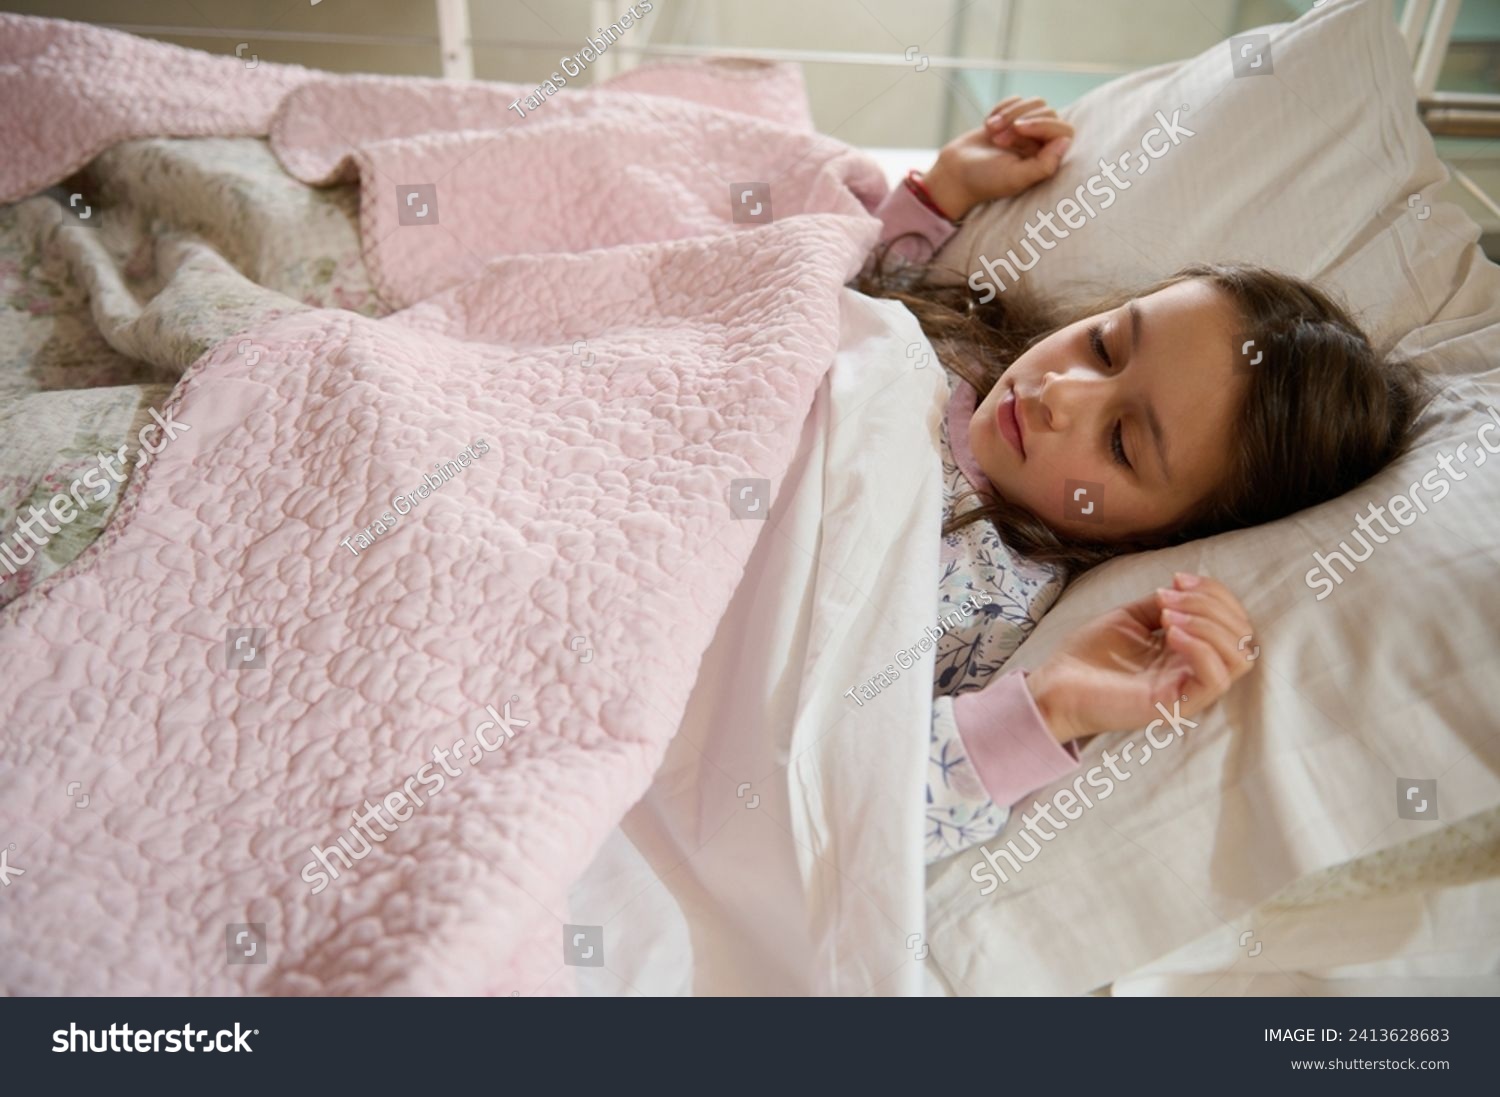 Authentic portrait of Caucasian elementary age, a cute little kid girl seeing sweet dreams while sleeping on the bed with comfortable mattress. Bedtime. Bedchamber furniture. Happy carefree childhood #2413628683